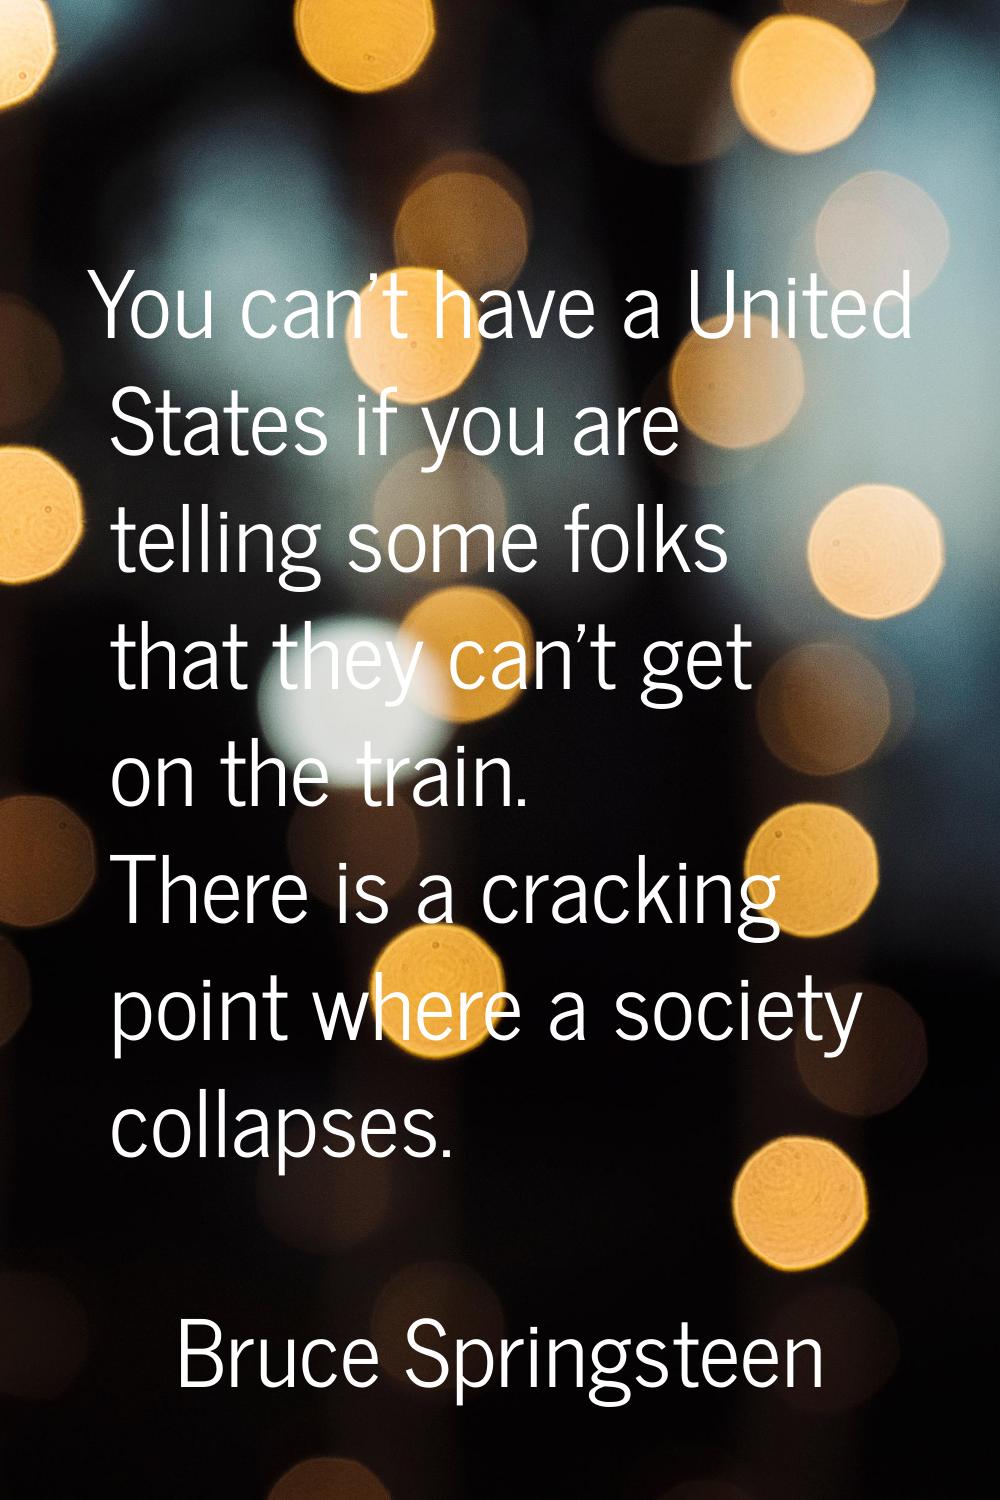 You can't have a United States if you are telling some folks that they can't get on the train. Ther